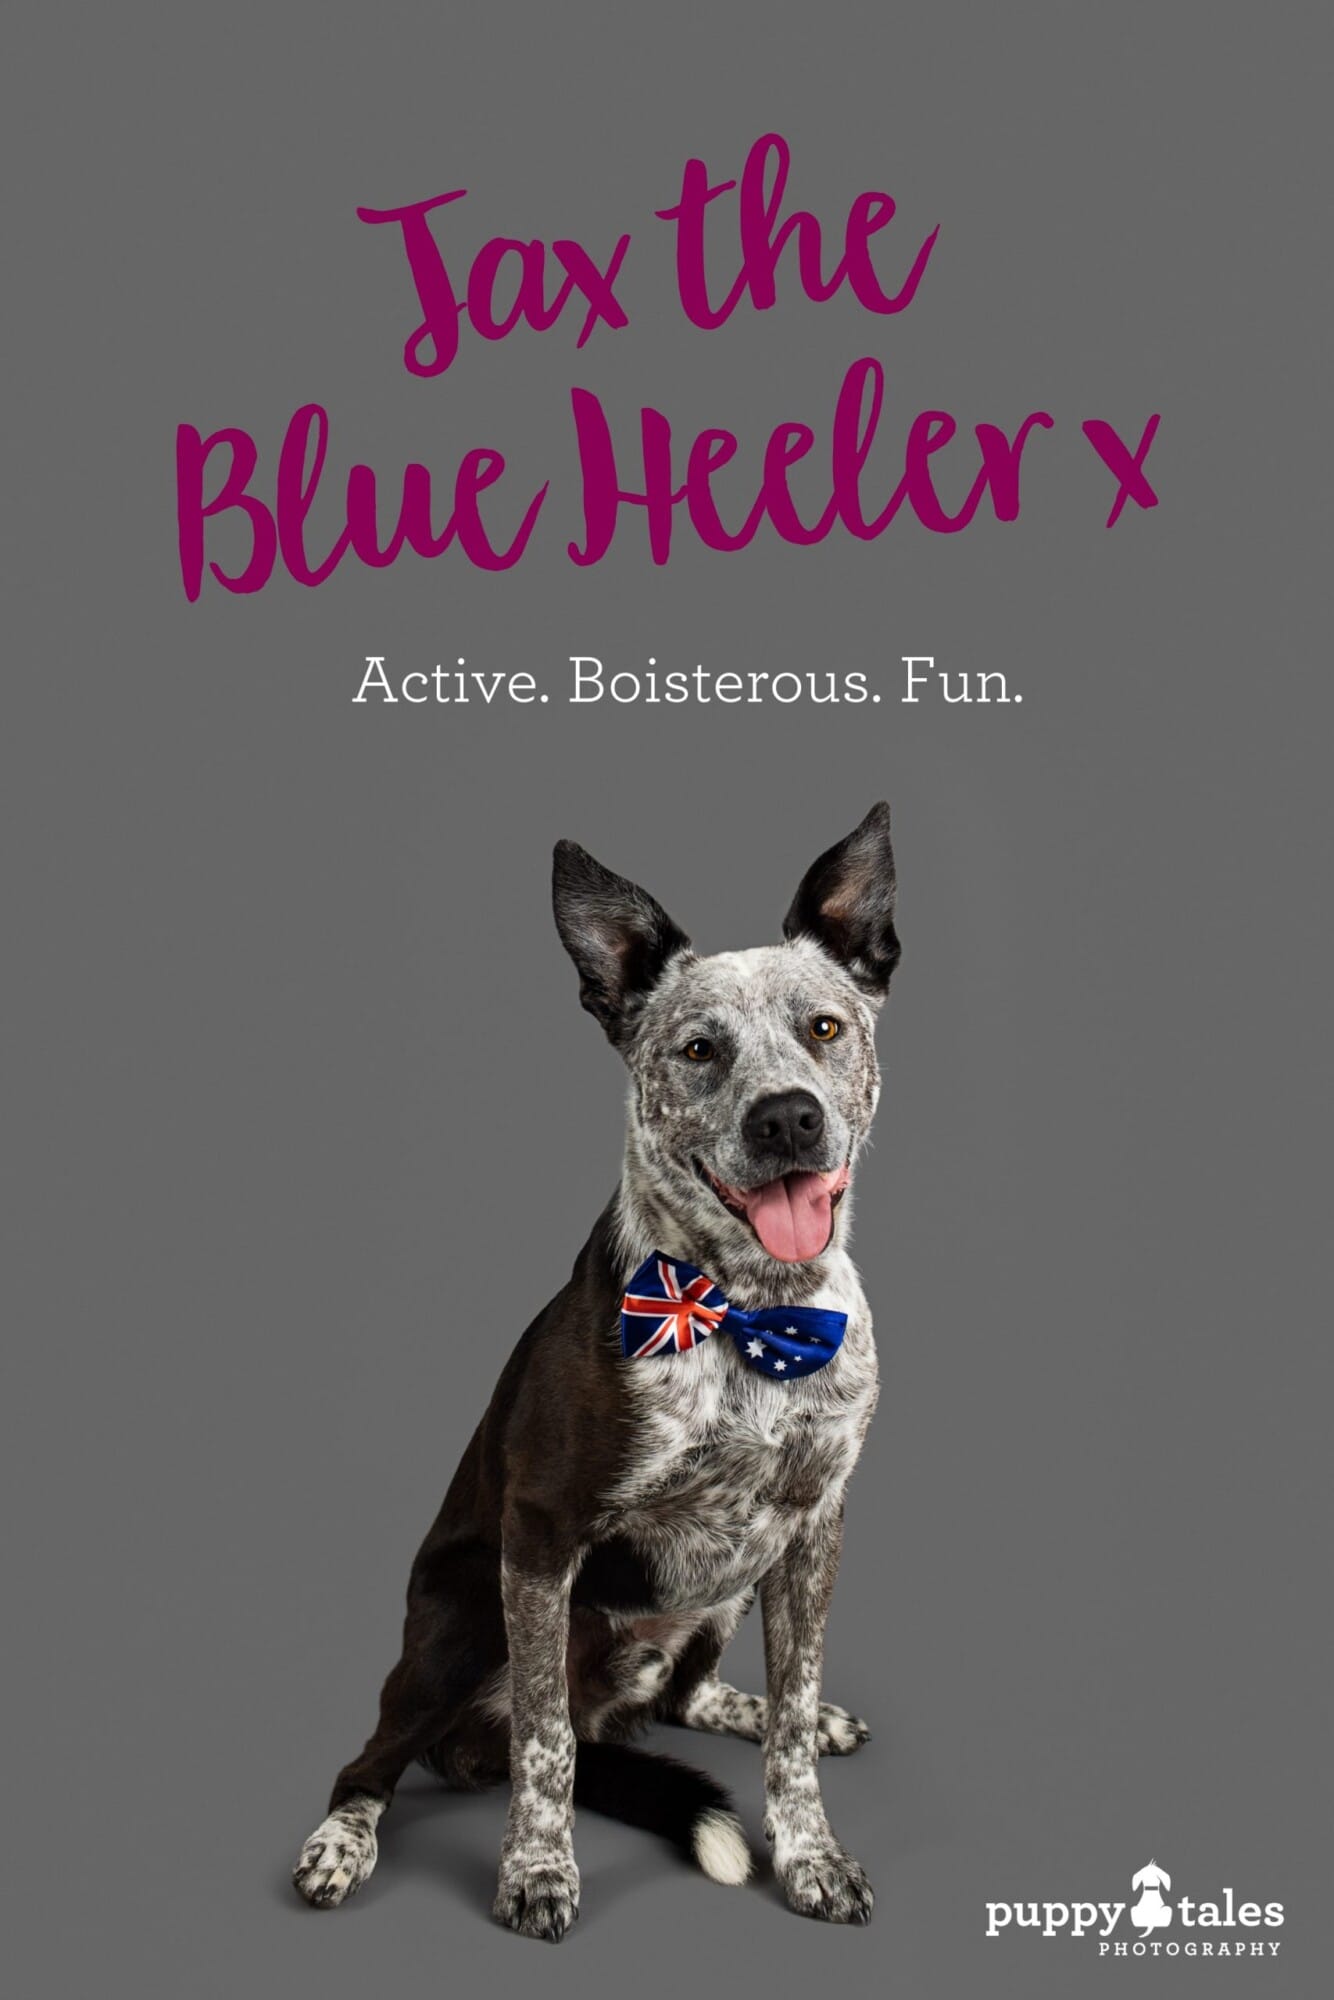 Jax the Australian Cattle Dog (Blue Heeler), photographed by Kerry Martin for Project Dogalogue. Pinterest graphic for his blog post on the Puppy Tales website.